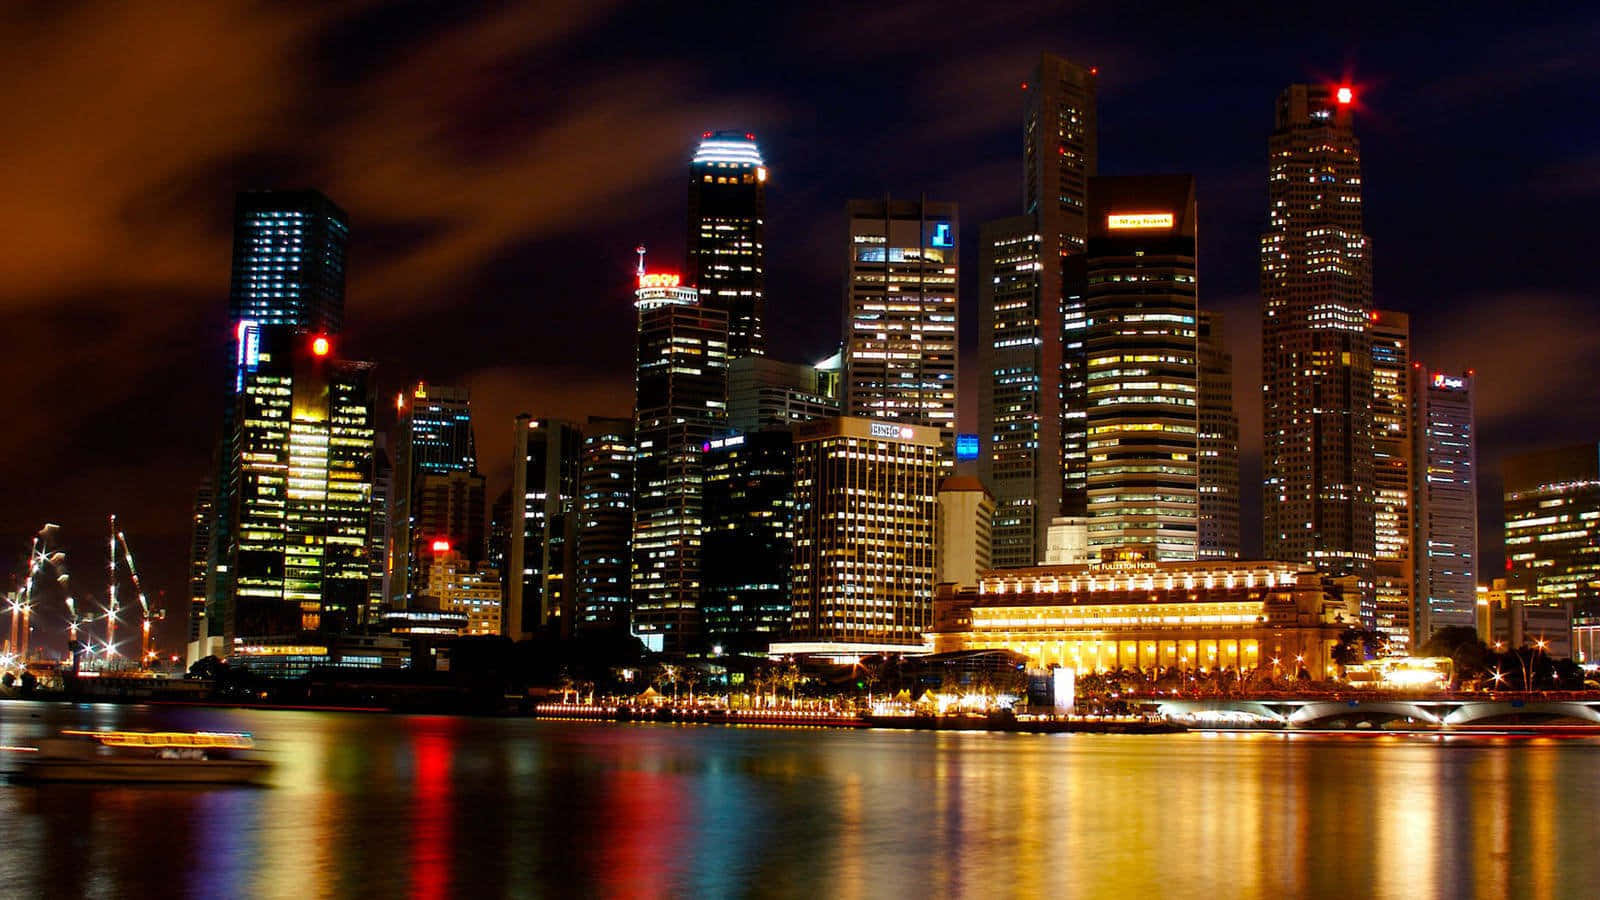 Singapore City Night Pictures